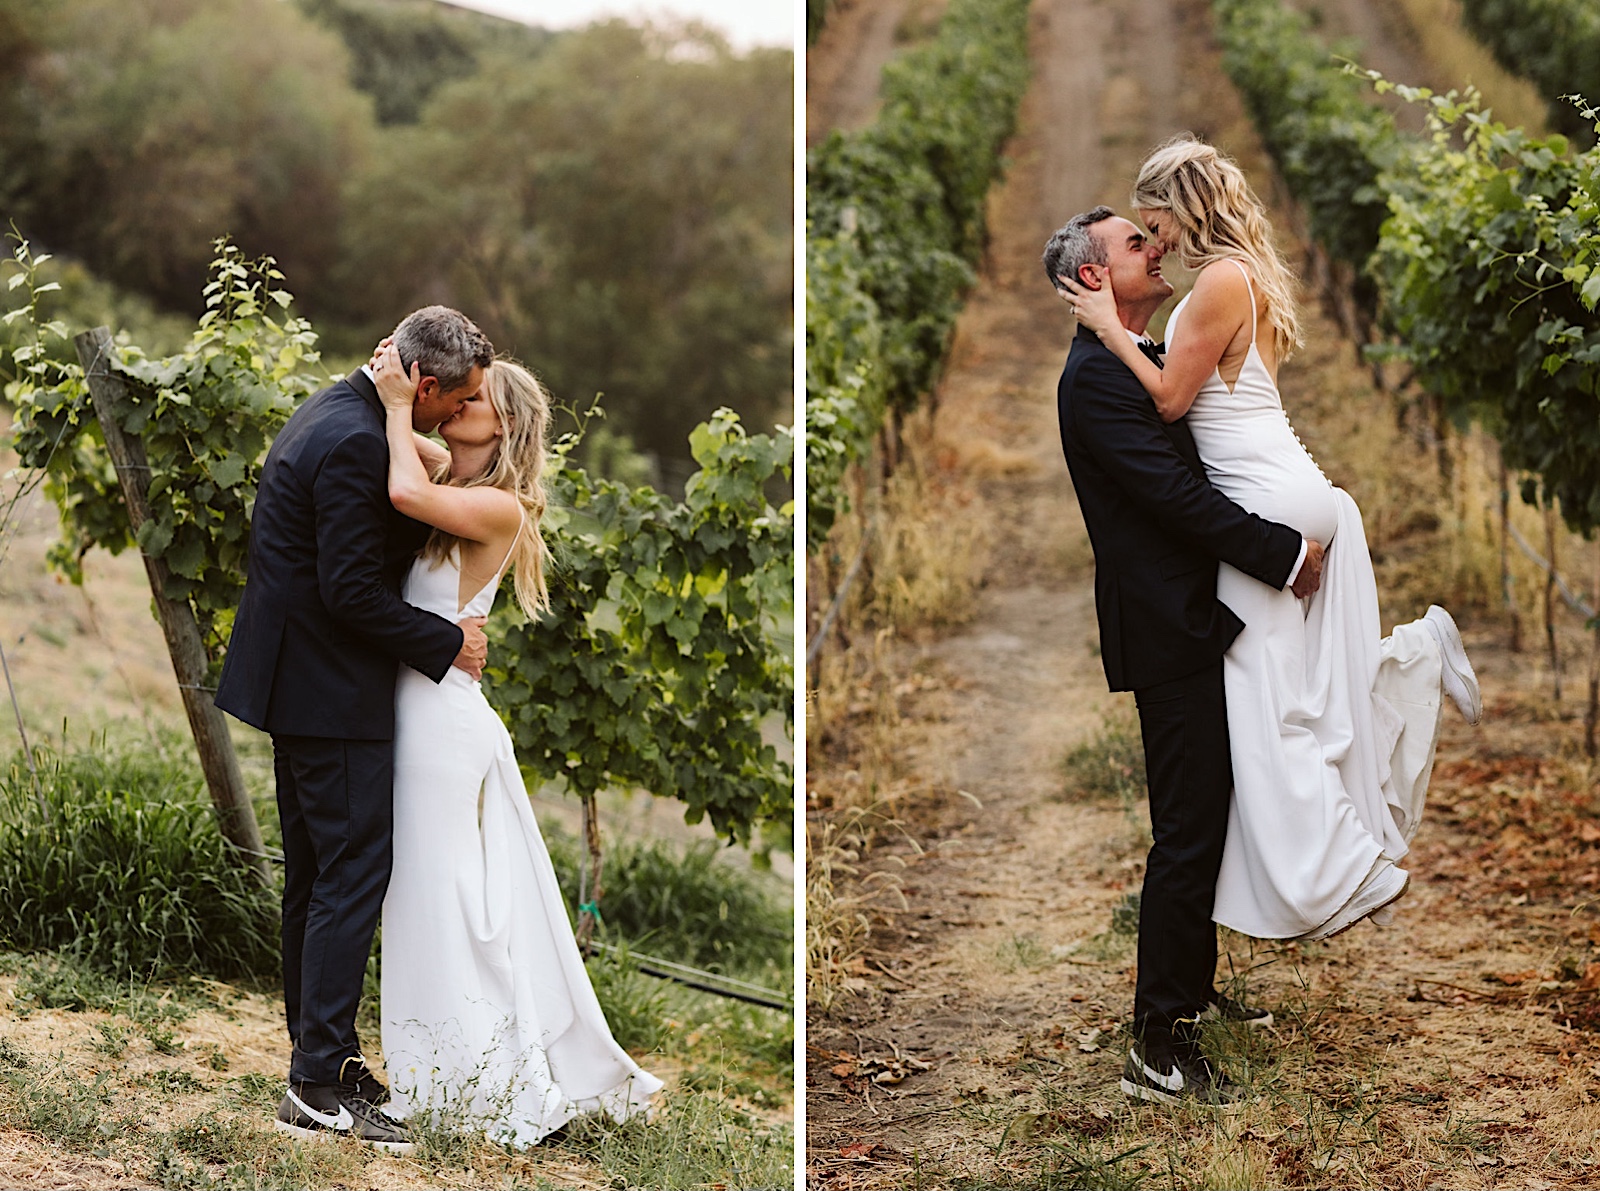 Vibrant Wedding At Siren Song Vineyard: sunset pictures of bride and groom